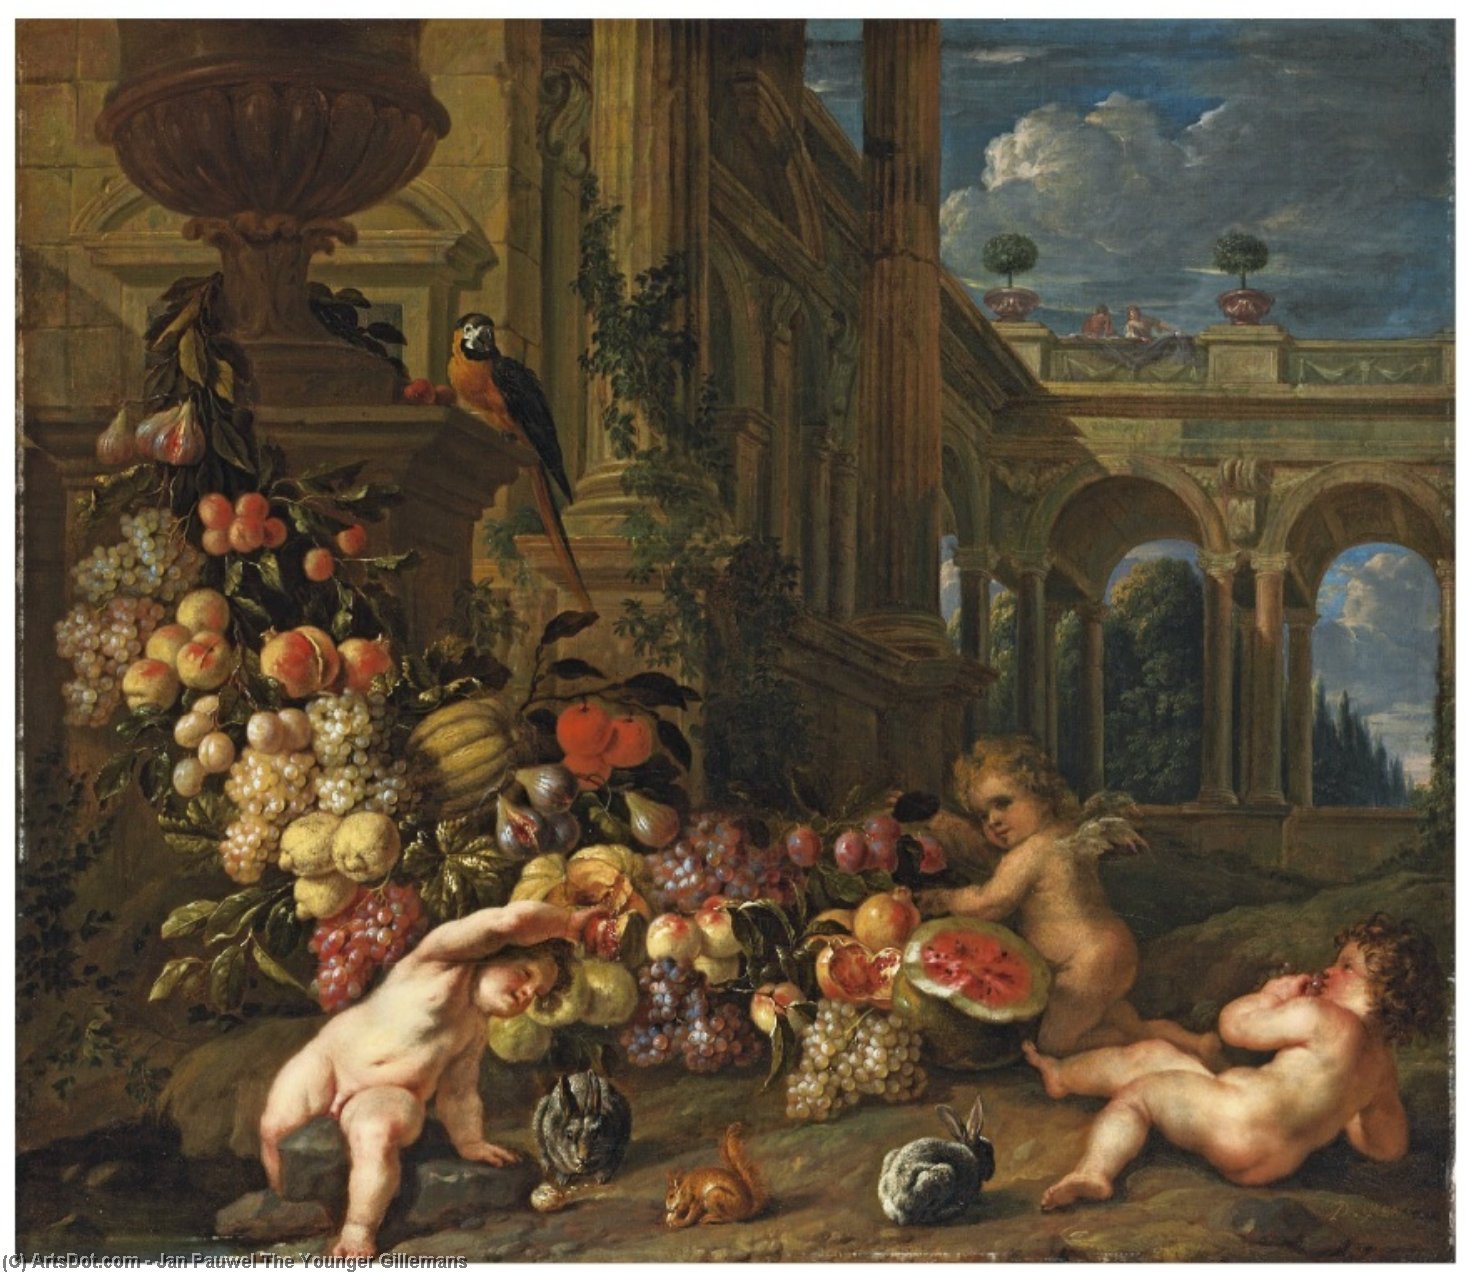 WikiOO.org - دایره المعارف هنرهای زیبا - نقاشی، آثار هنری Jan Pauwel The Younger Gillemans - An architectural capriccio with putti around a swag of fruit, with a parrot, squirrel and rabbits